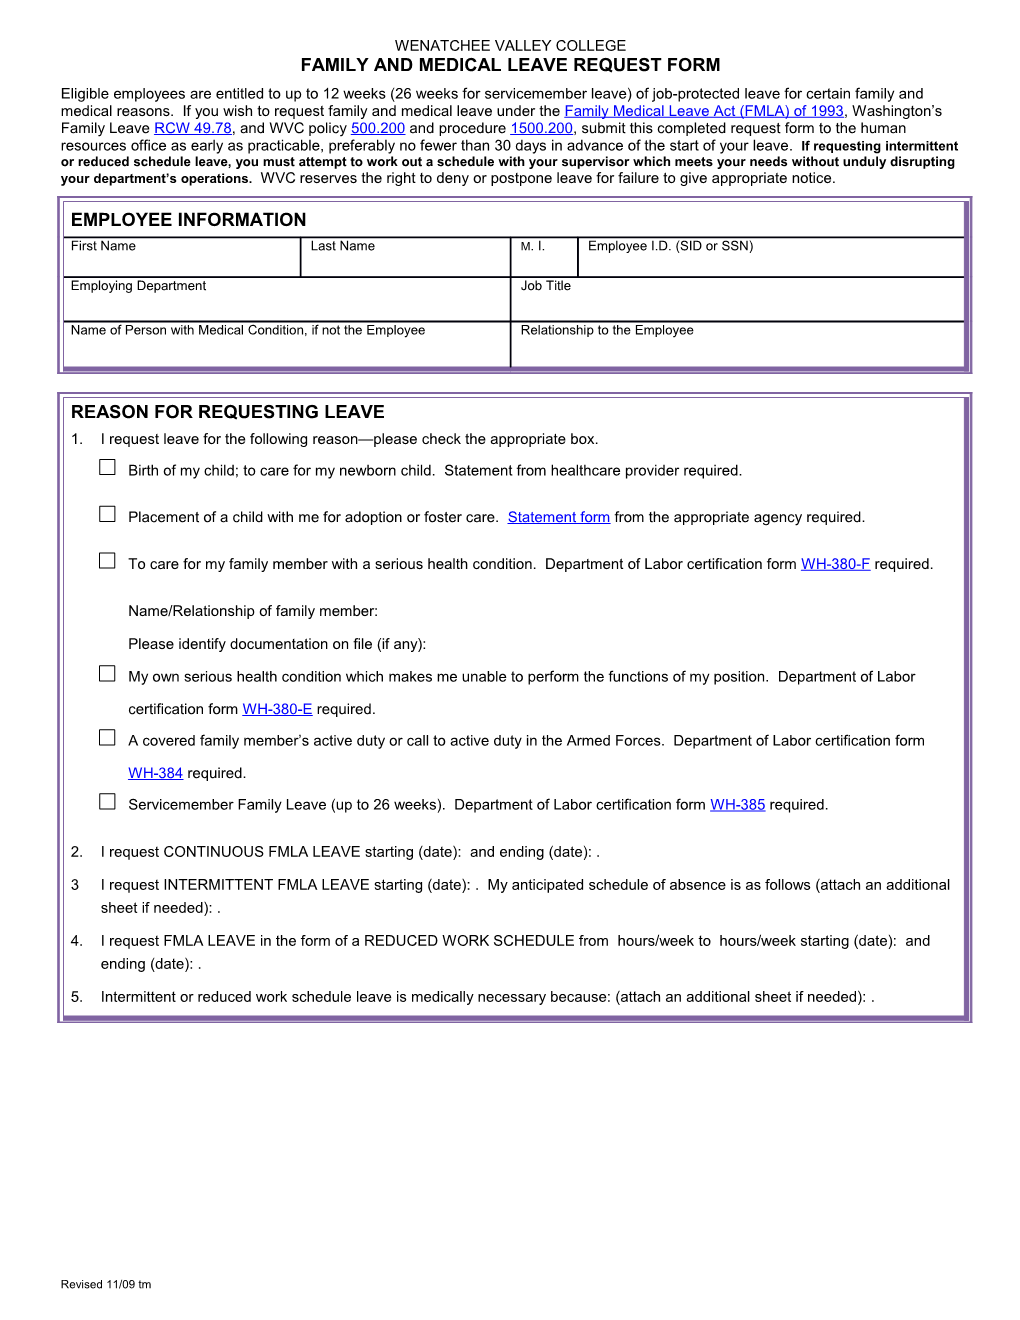 Family and Medical Leave Request Form